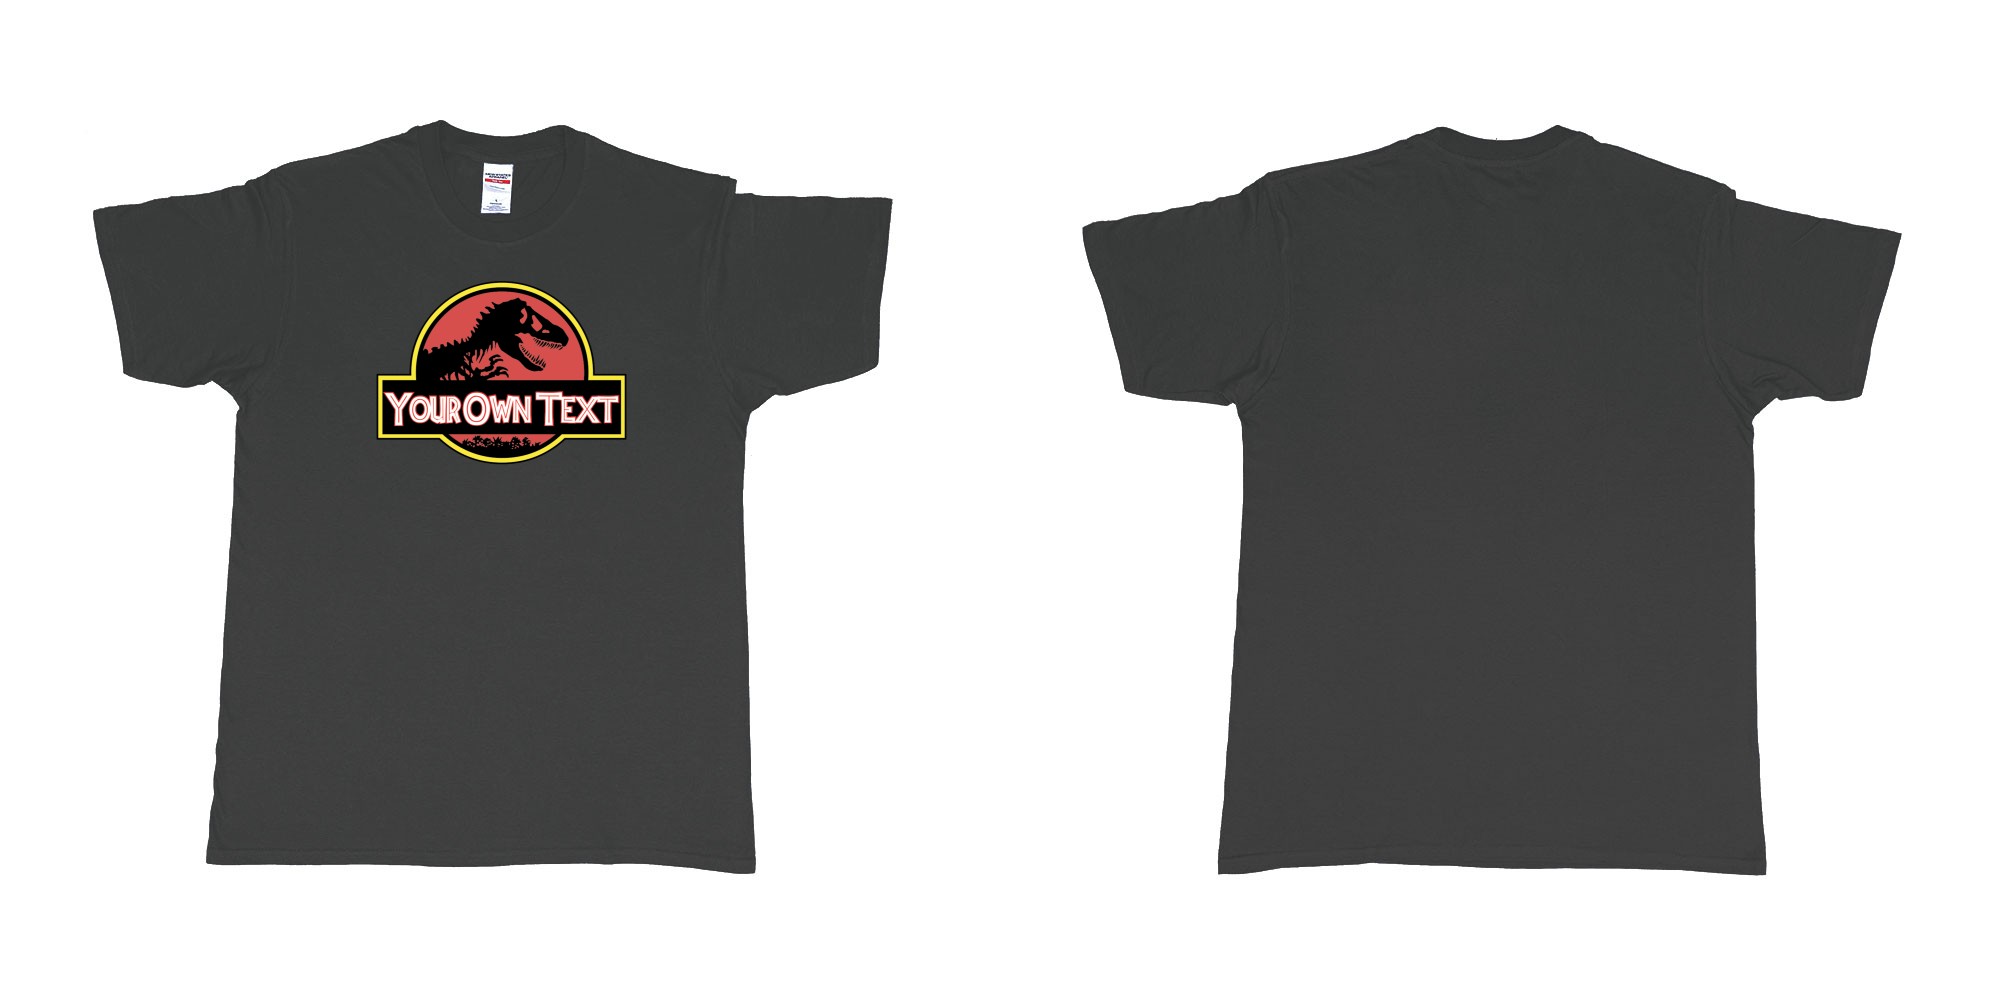 Custom tshirt design Jurassic Park in fabric color black choice your own text made in Bali by The Pirate Way